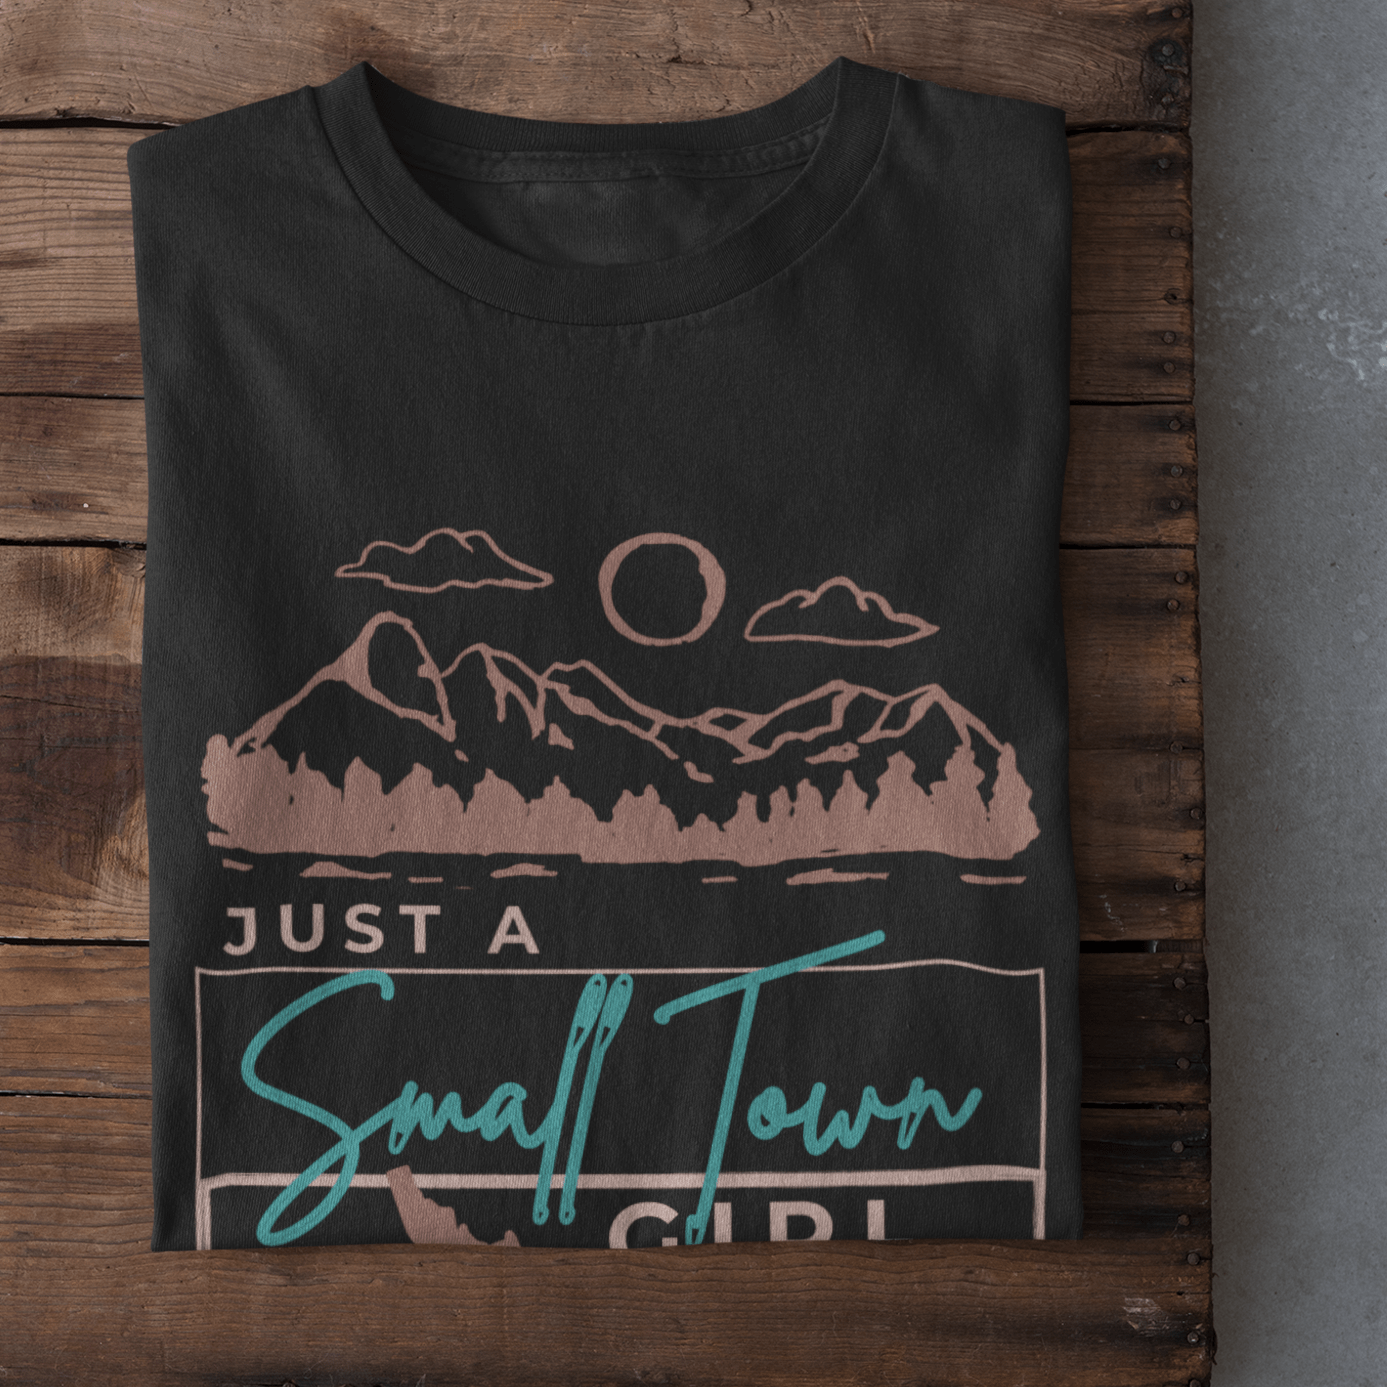 208 Supply Co Tees 2XL / Heather Black Small Town Girl Tee